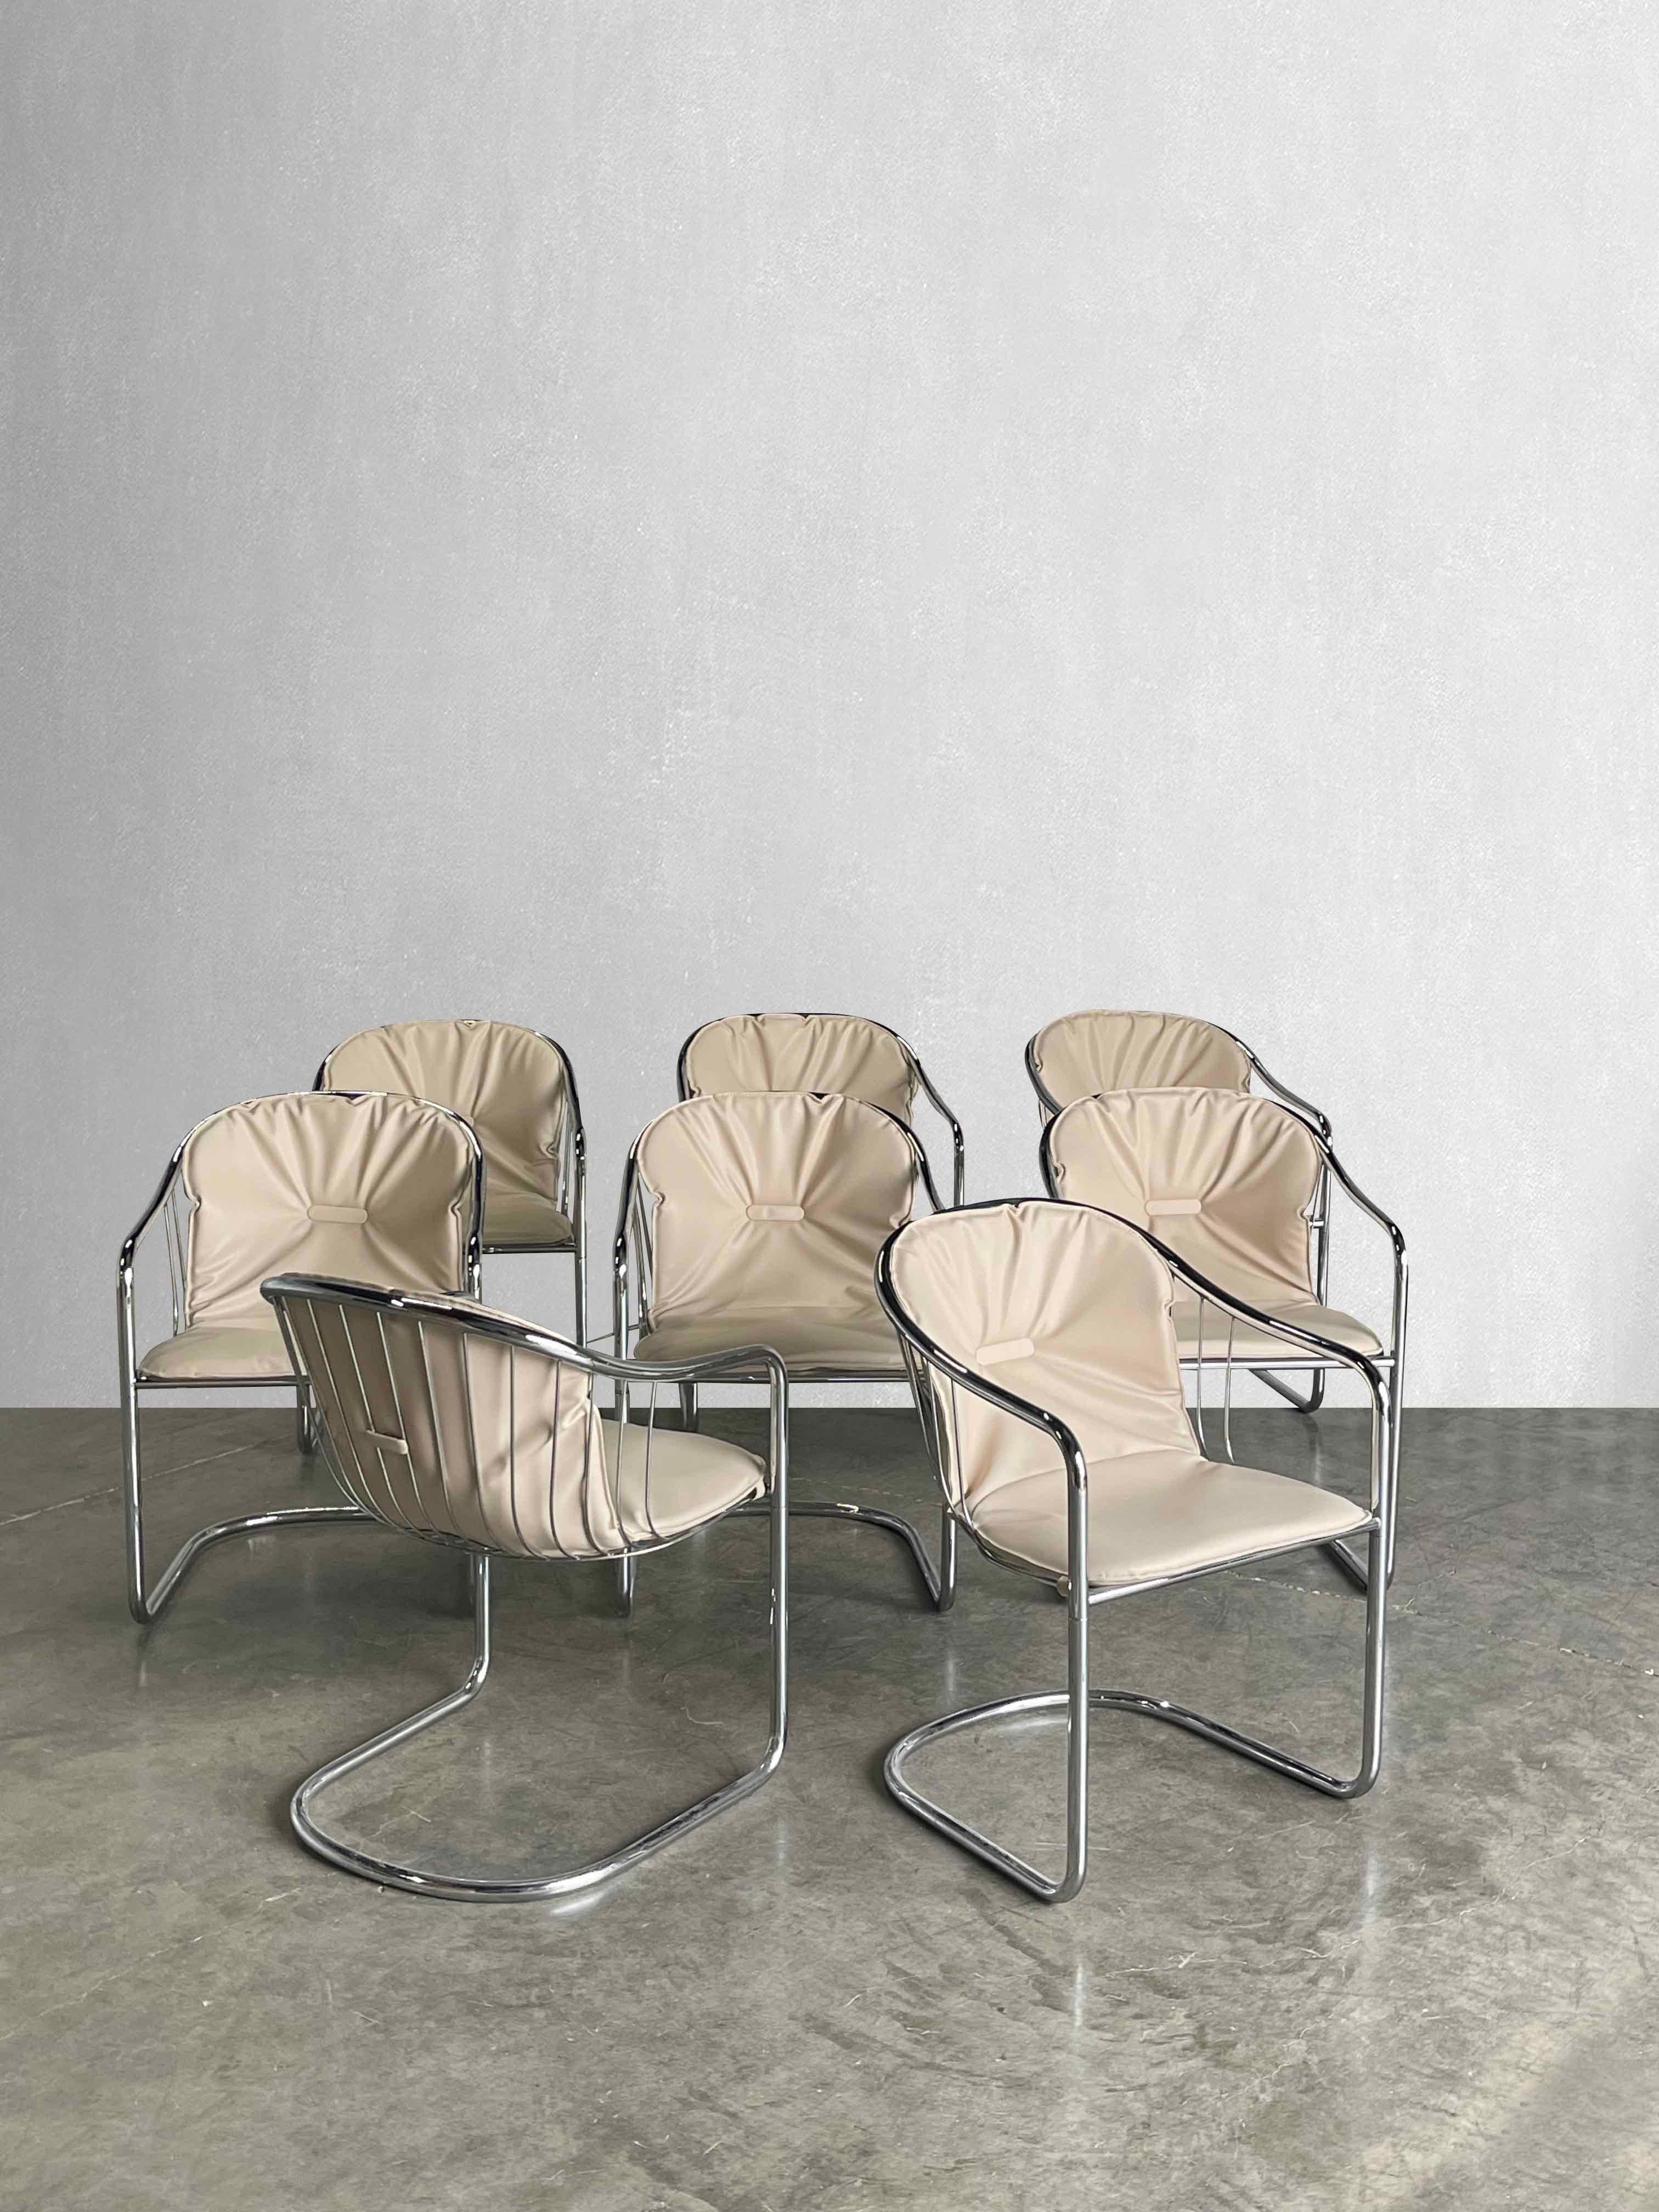 C.1960

These elegant chrome wire chairs were designed by Gastone Rinaldi for RIMA, Italy. They have been reupholstered in a beautiful ivory neutral vegan leather.

When selecting this fabric I was inspired by a clients styling of her travertine